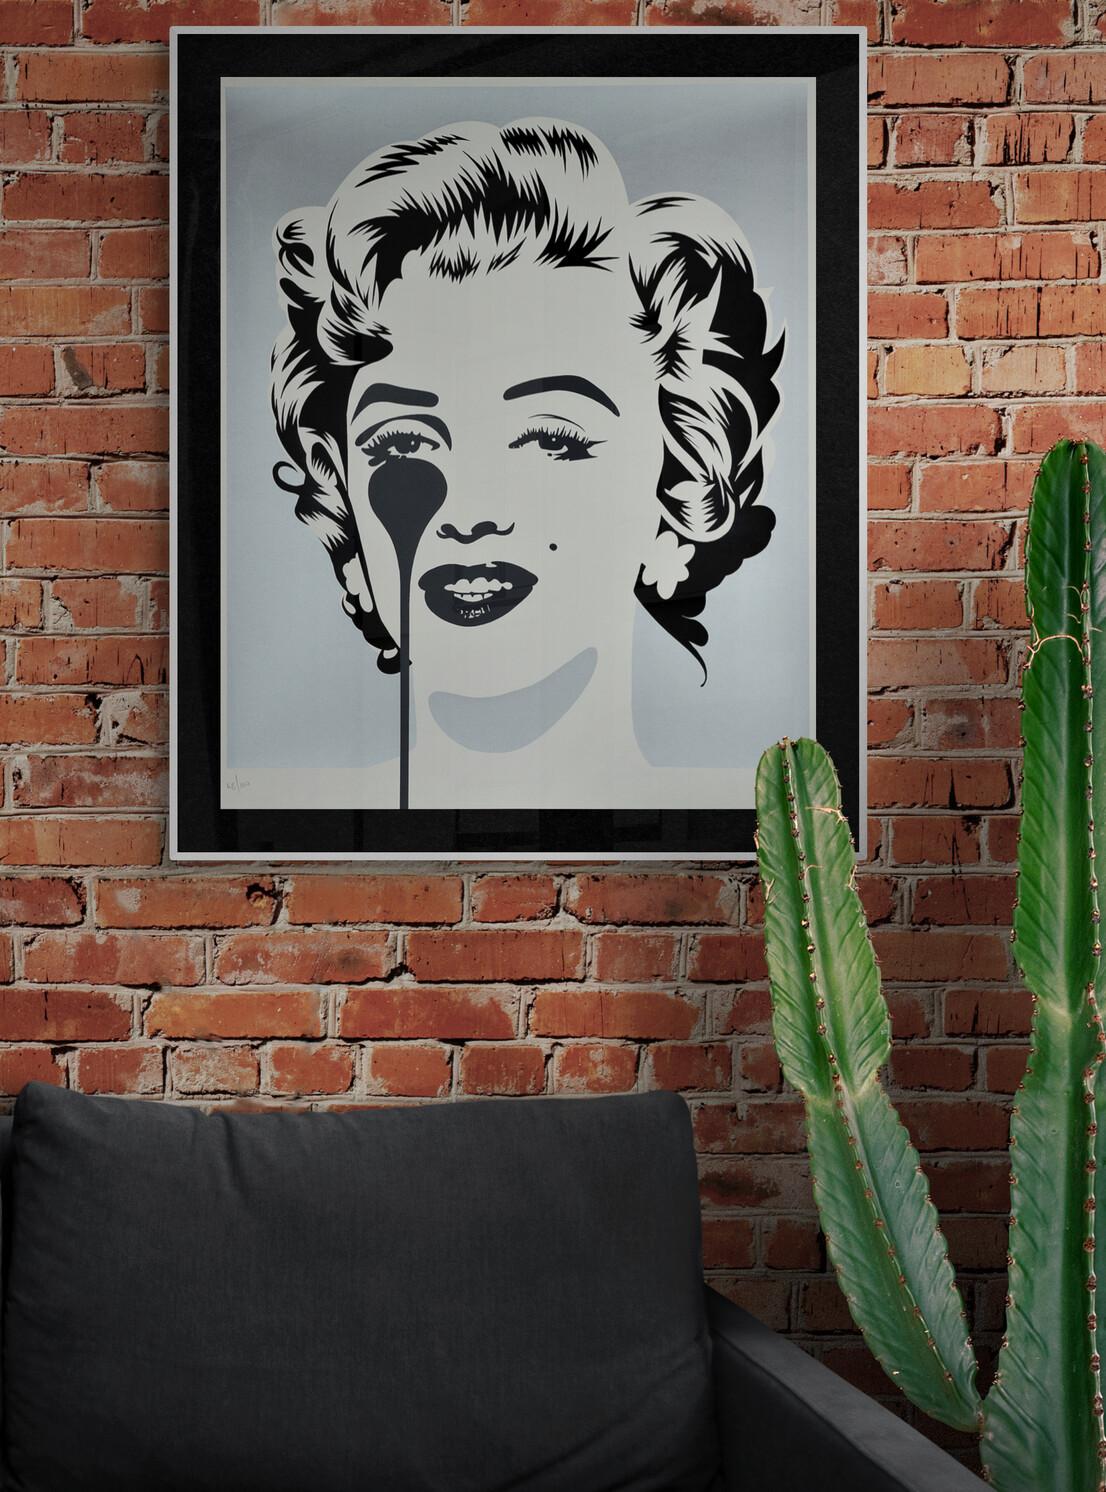 PURE EVIL - MARILYN CLASSIC (BLACK)
Date of creation: 2021
Medium: Screen print on Fedrigoni paper
Edition: 100
Size: 85 x 70 cm
Condition: In mint conditions, brand new and never framed
Observations: Screen print on high quality Fedrigoni paper of